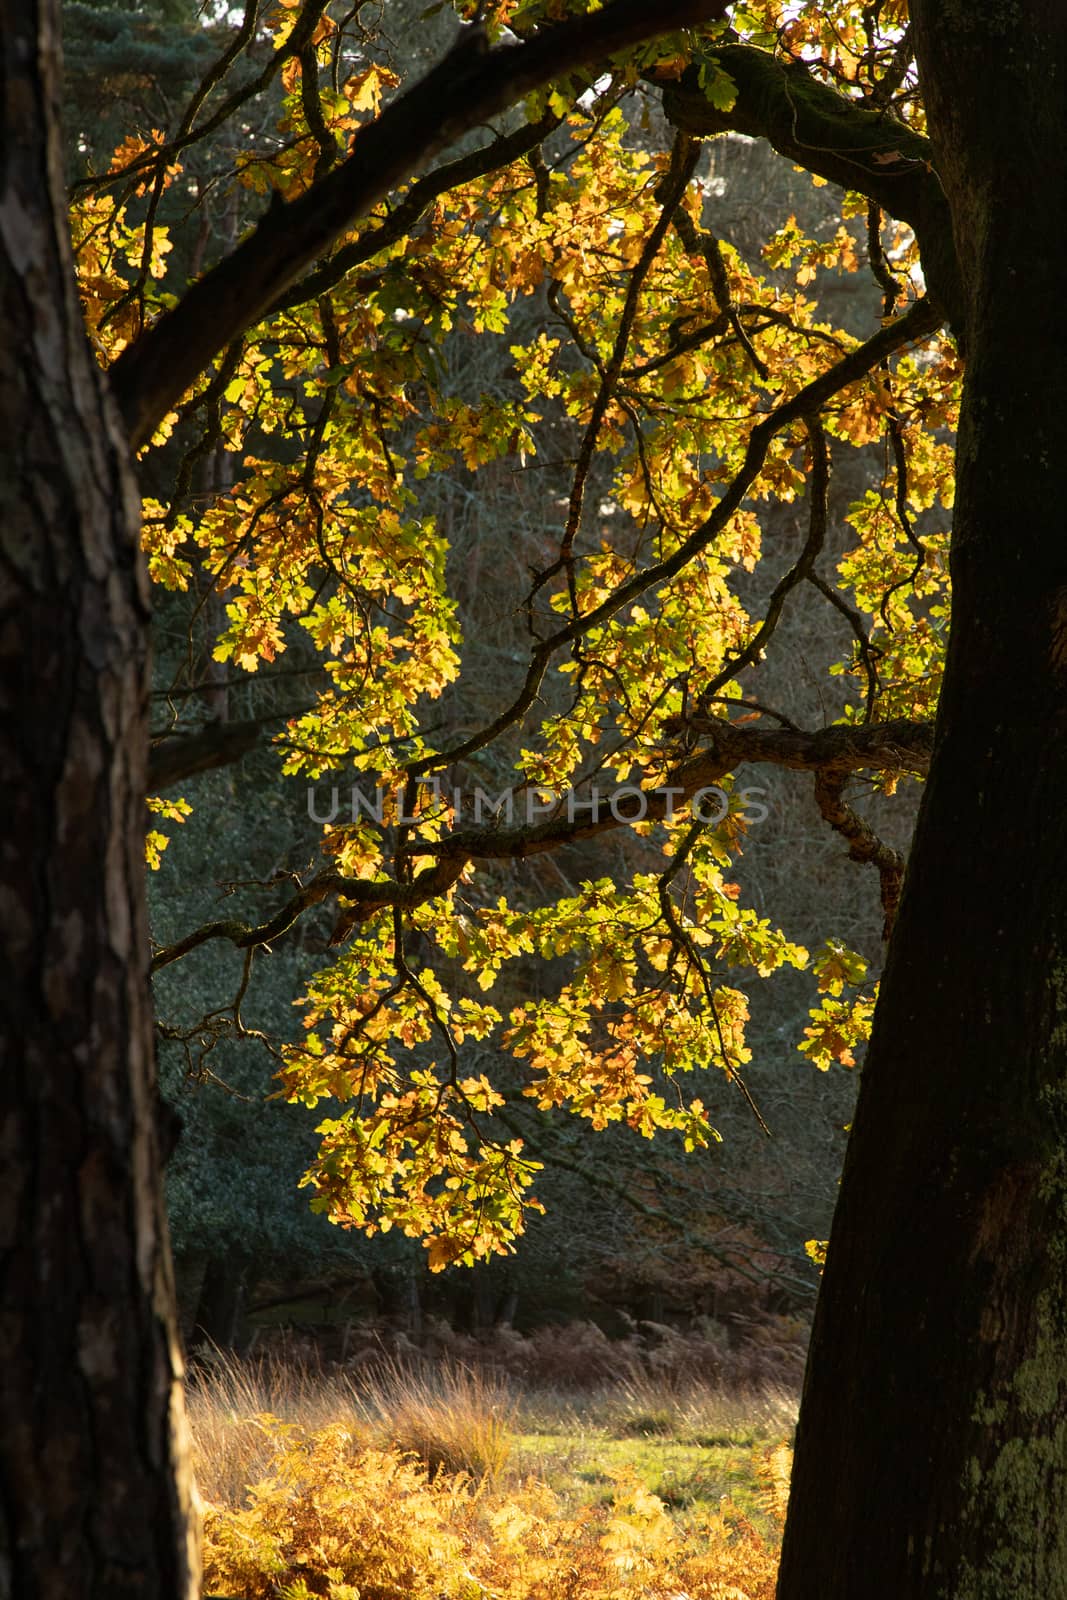 Trees in autumn colour, golden leaves in low sun in forest setting by kgboxford